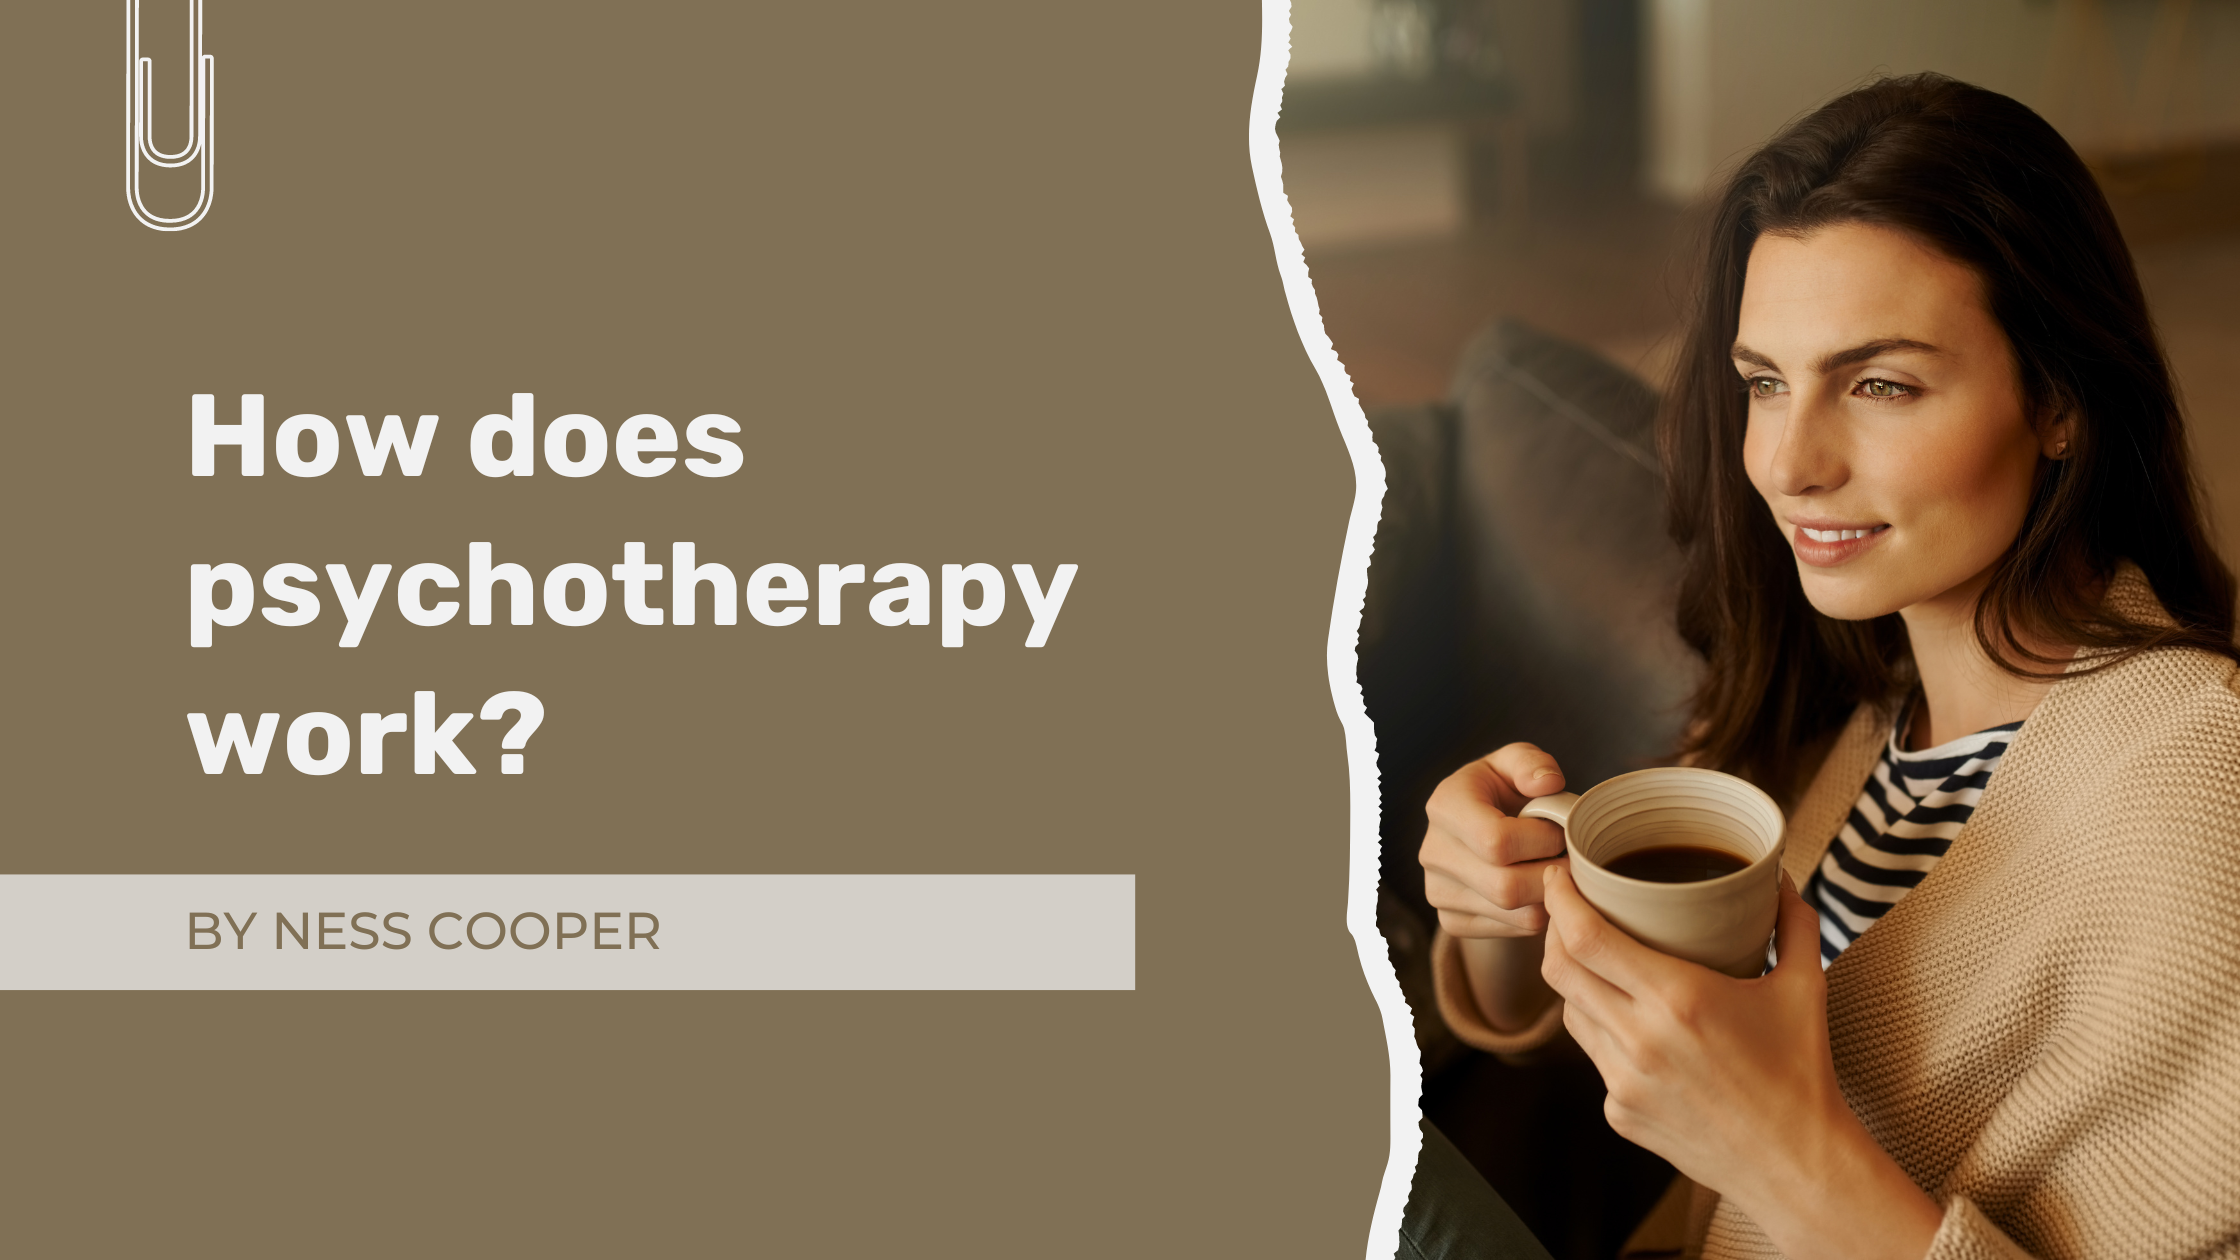 How does psychotherapy work?